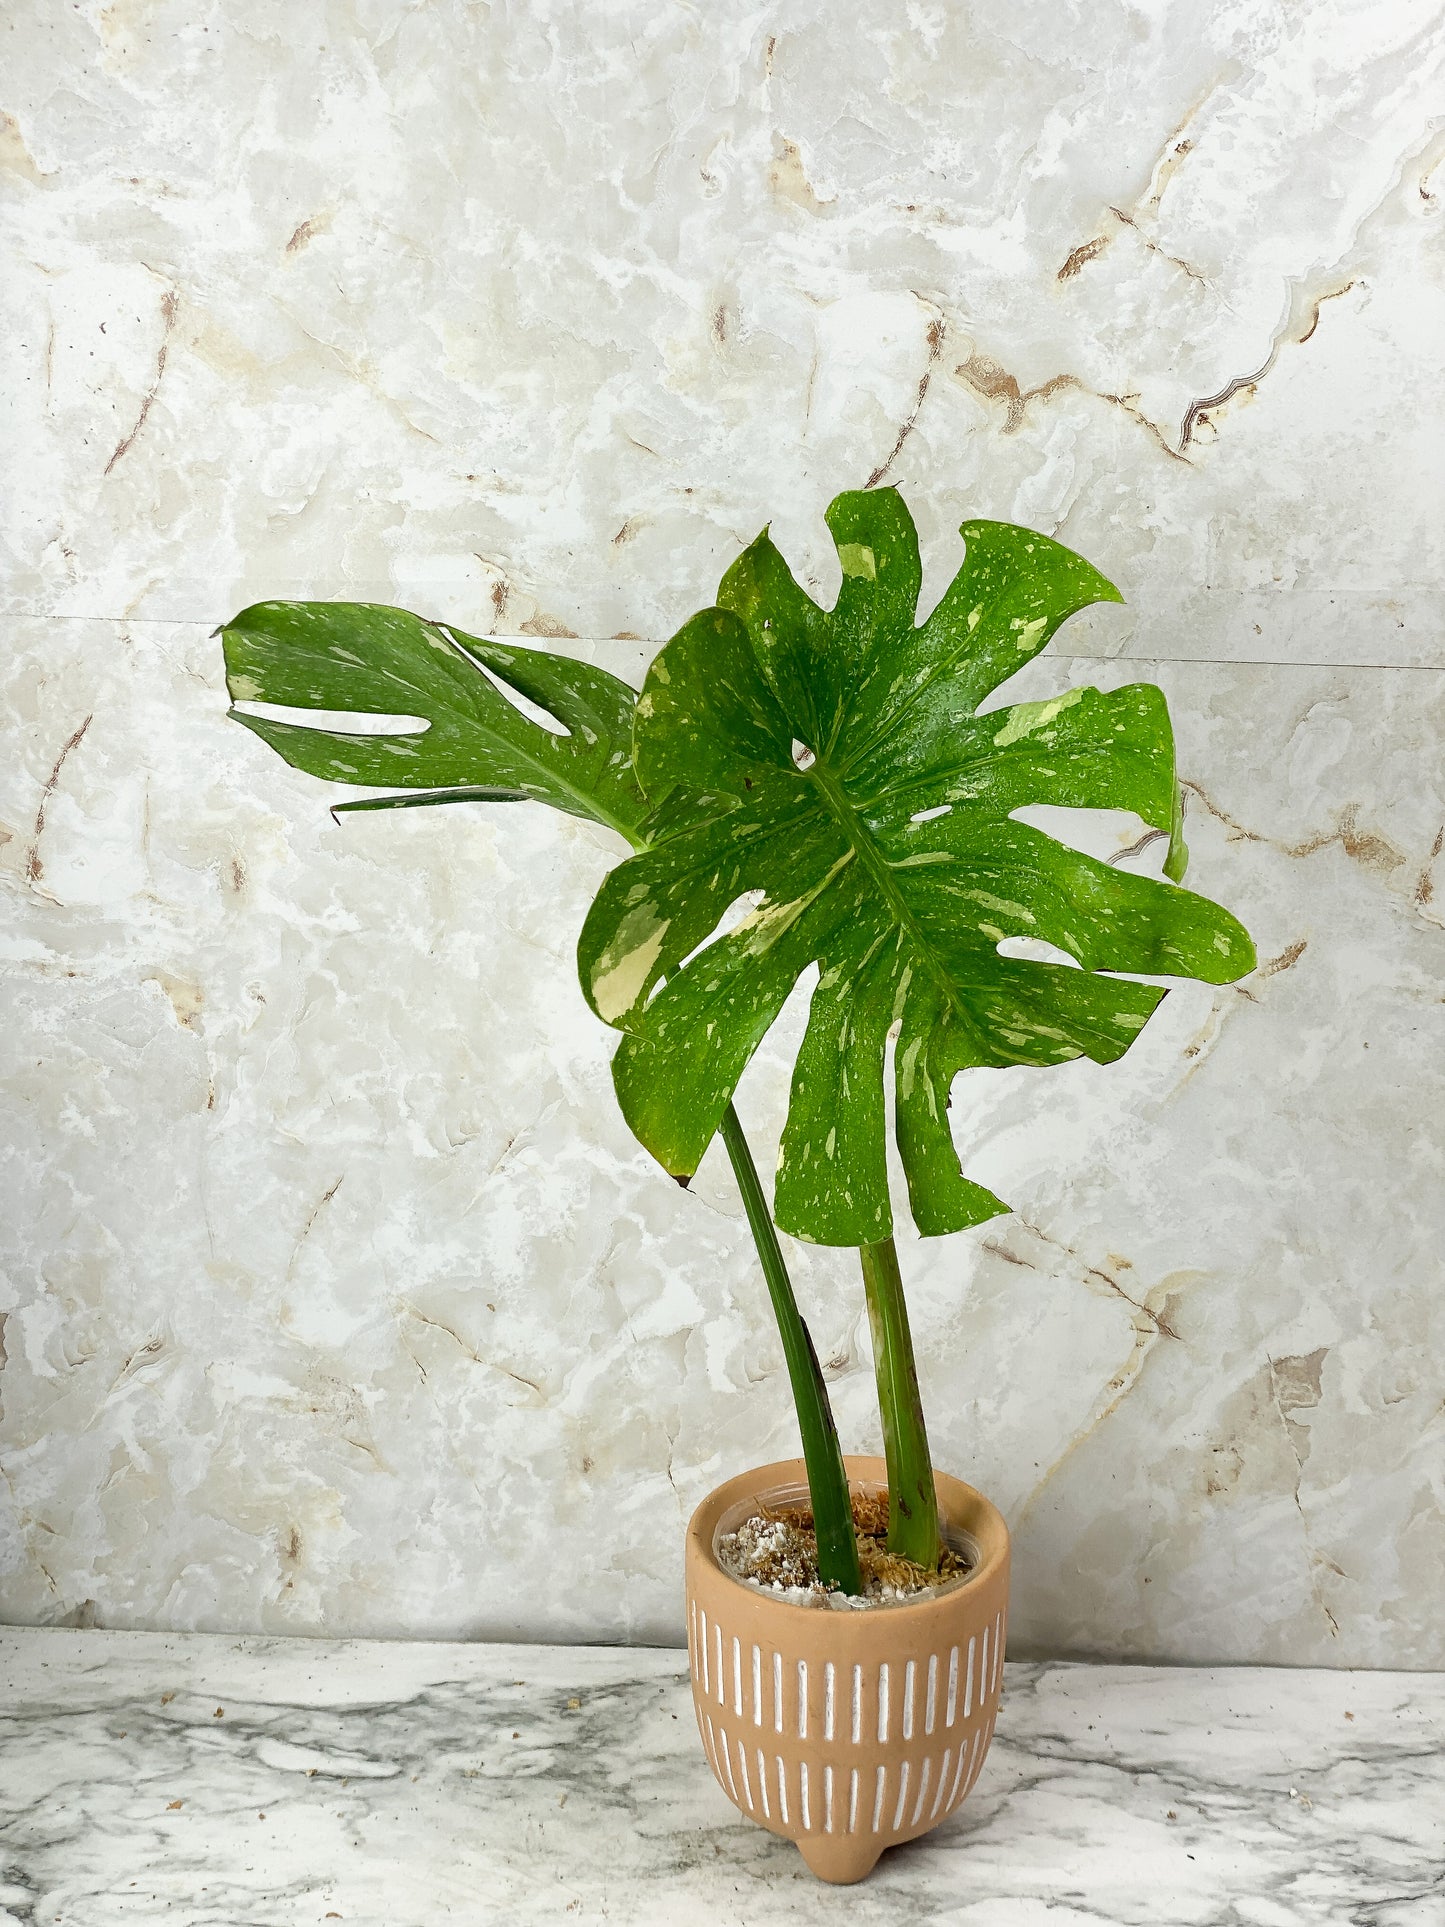 Monstera Thai Constellation Slightly Rooted 2 highly variegated leaves